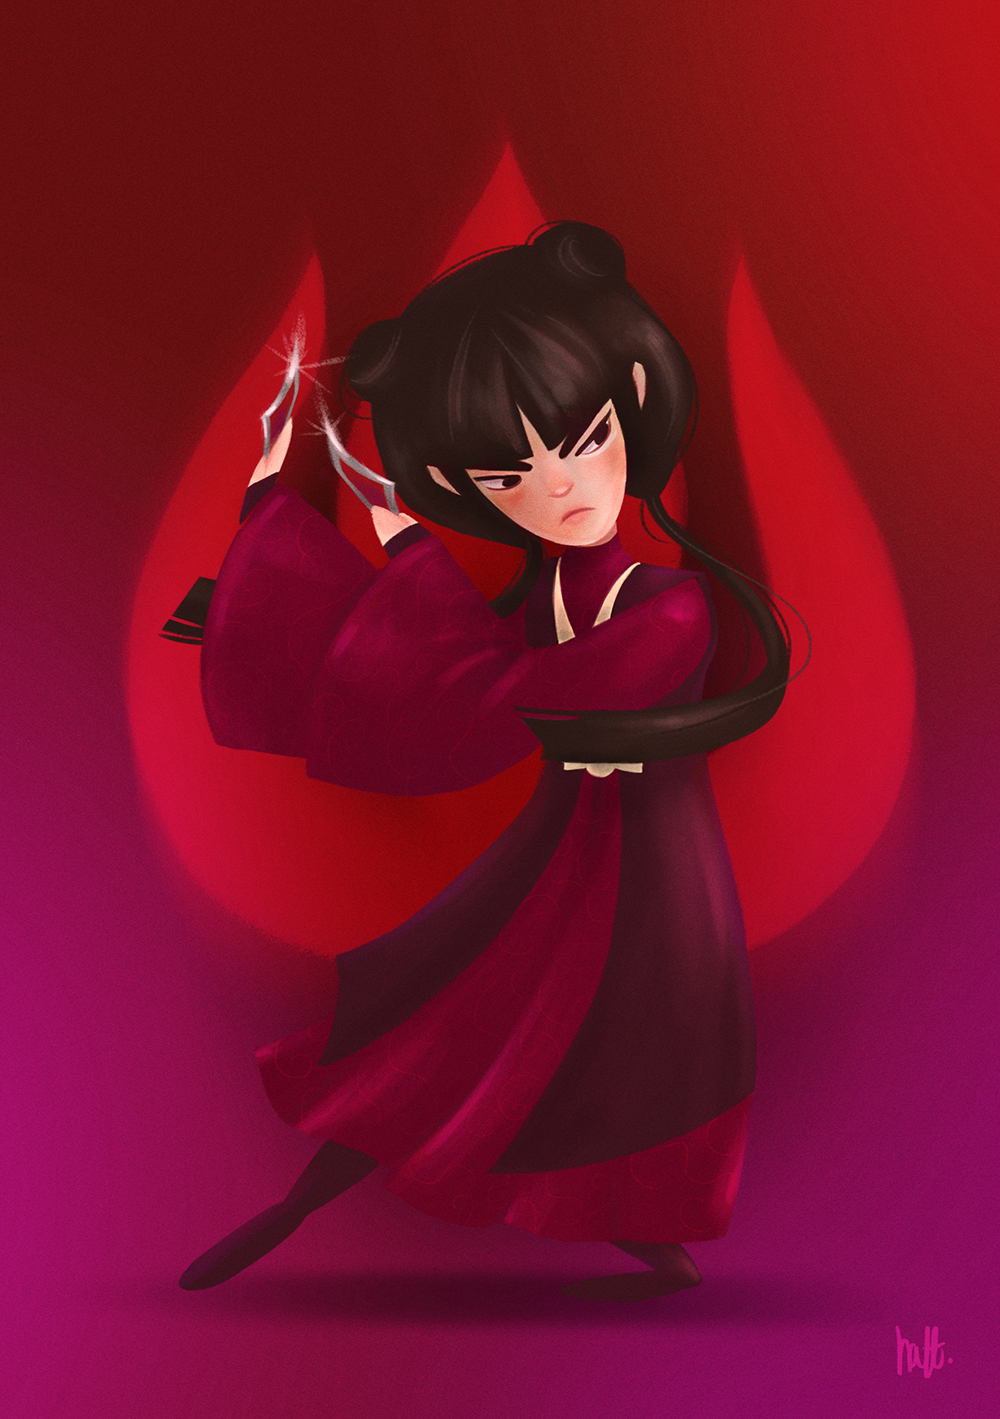 Mai avatar the last airbender girl red Matial arts